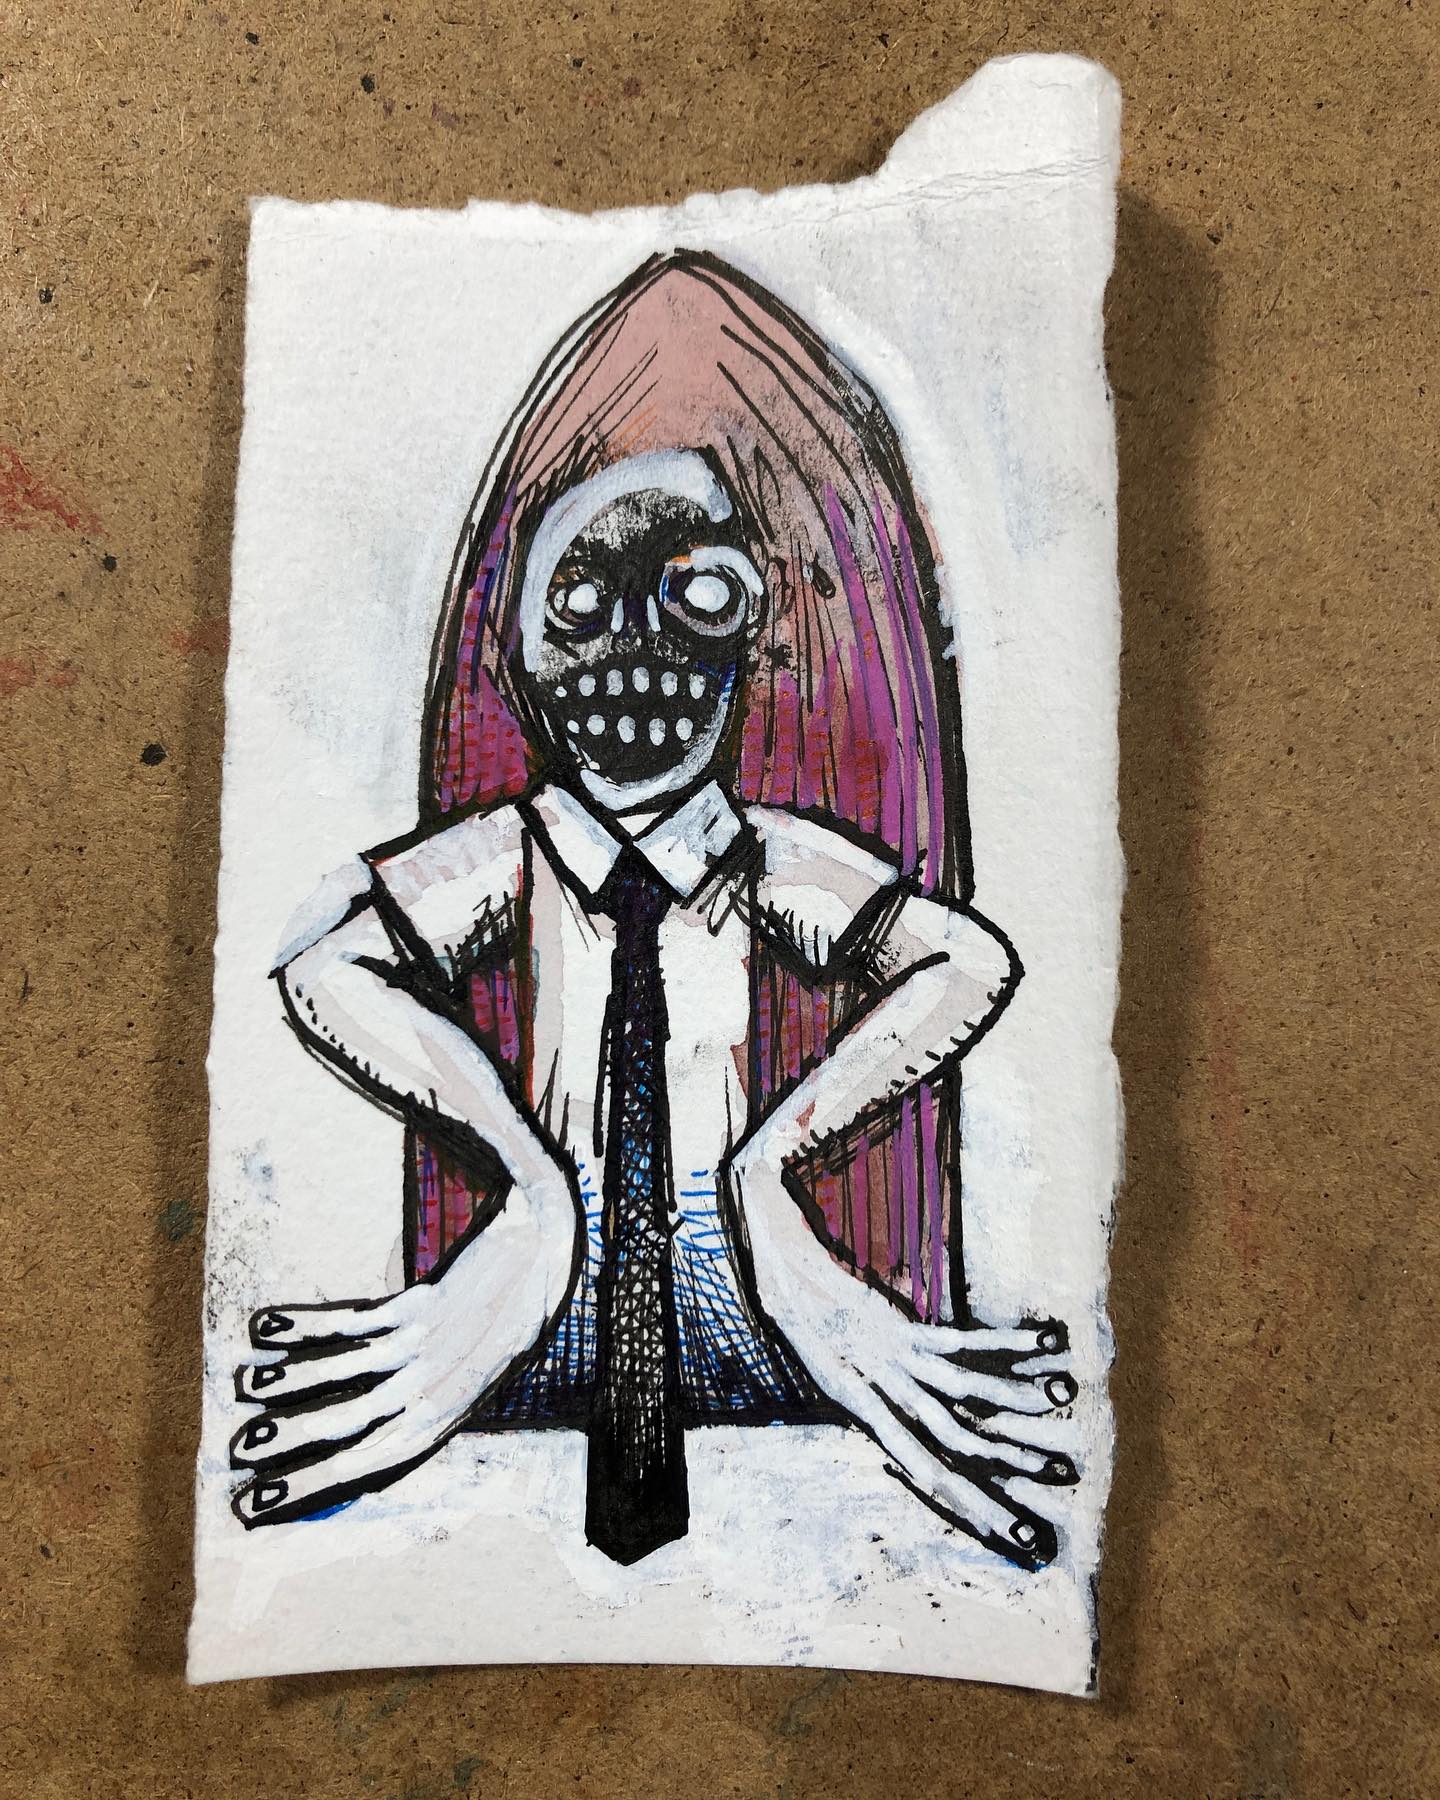 Skull dude with a tie and two opposite wing hands peeking through a red/purple window